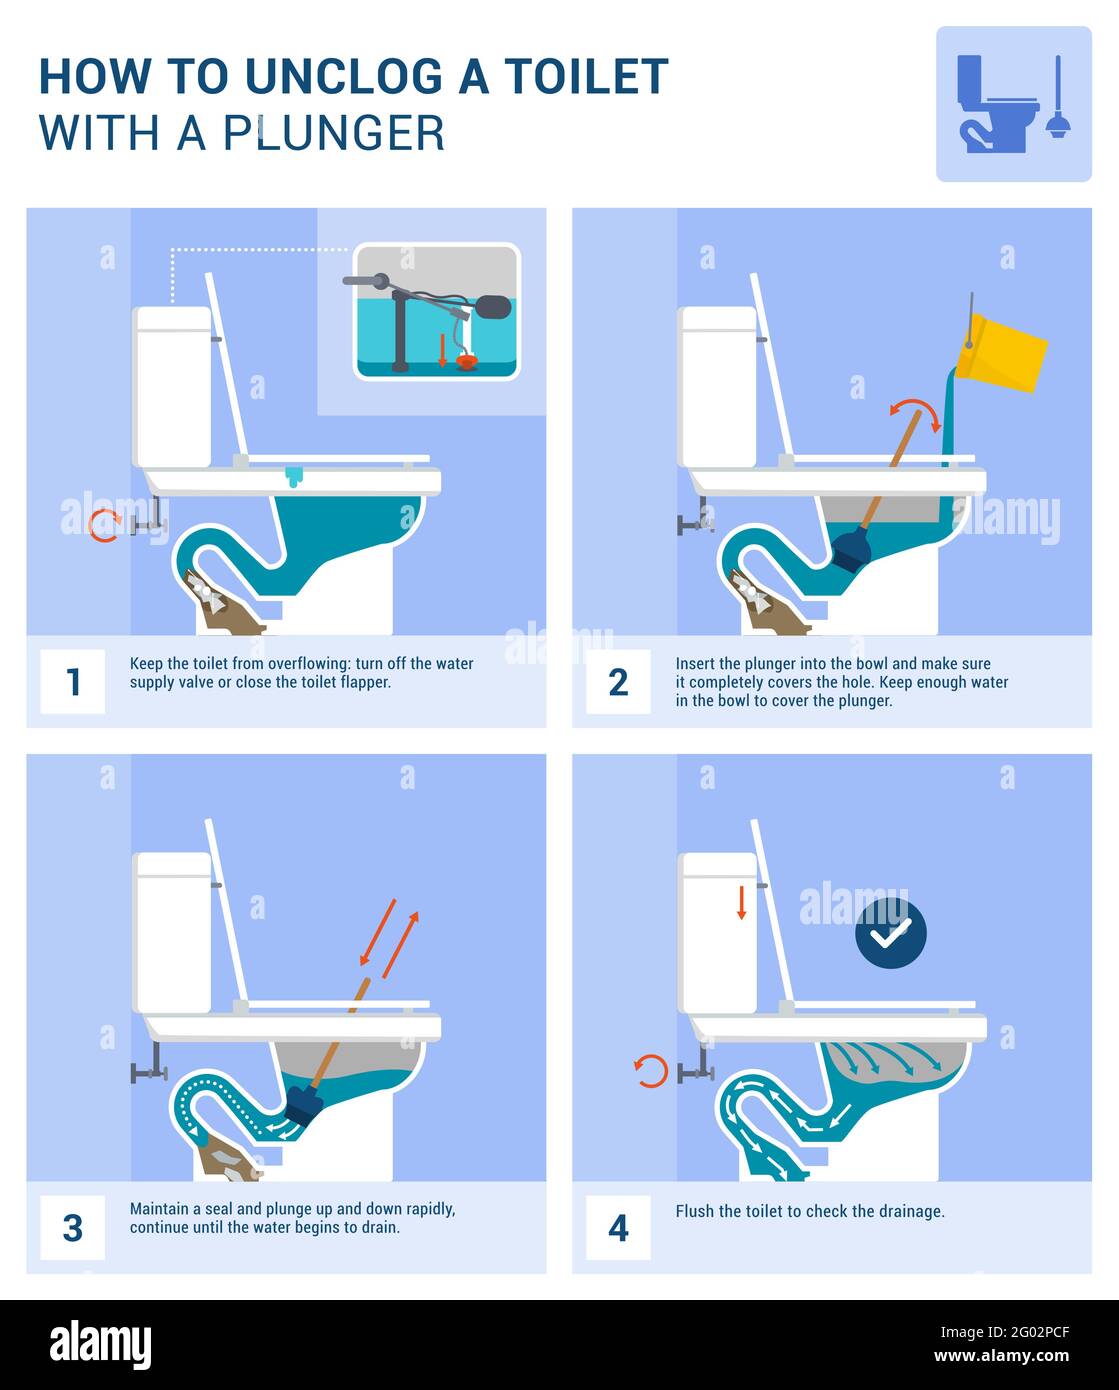 How to unclog a toilet?